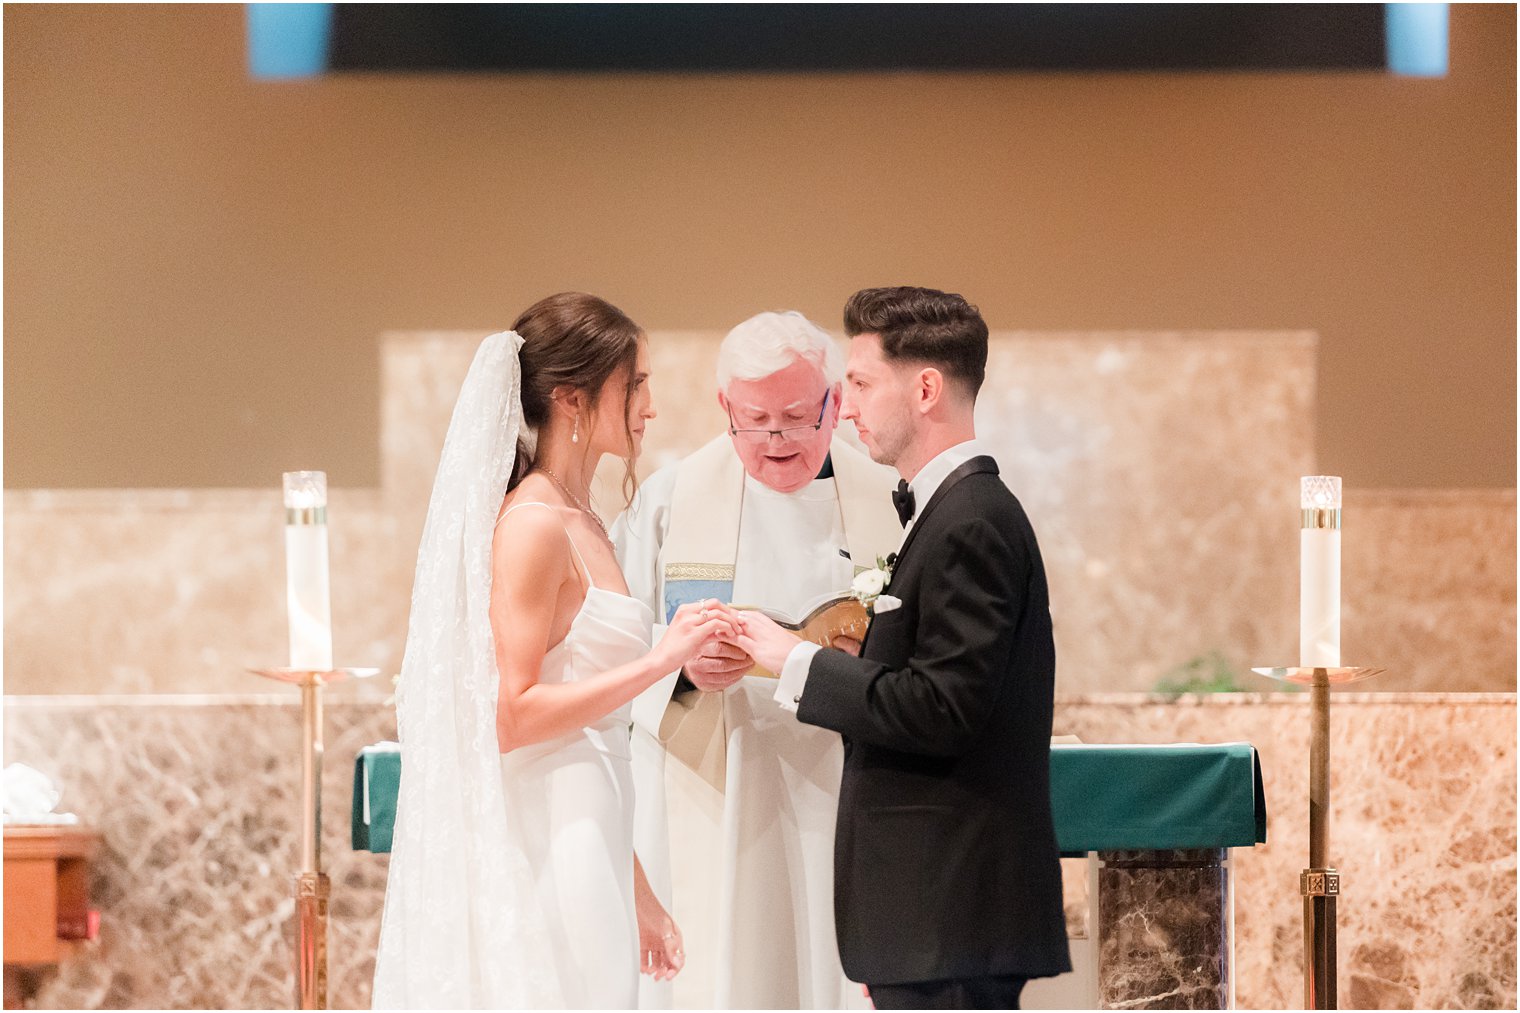 newlyweds look at each other exchanging rings during traditional church ceremony in small New Jersey church